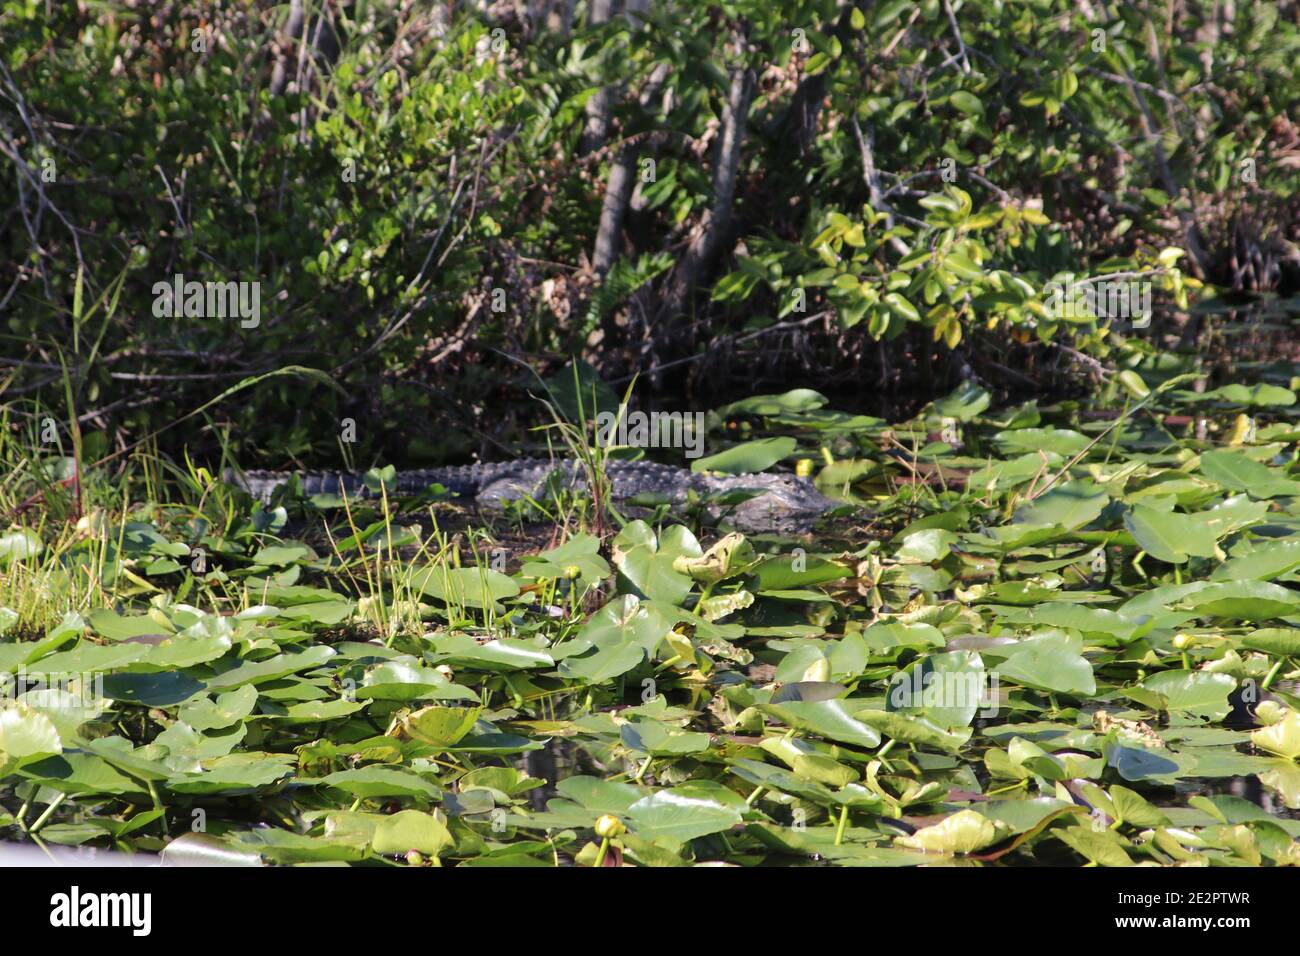 American Crocodile swimming in a swamp, Everglades National Park, Florida, USA Stock Photo